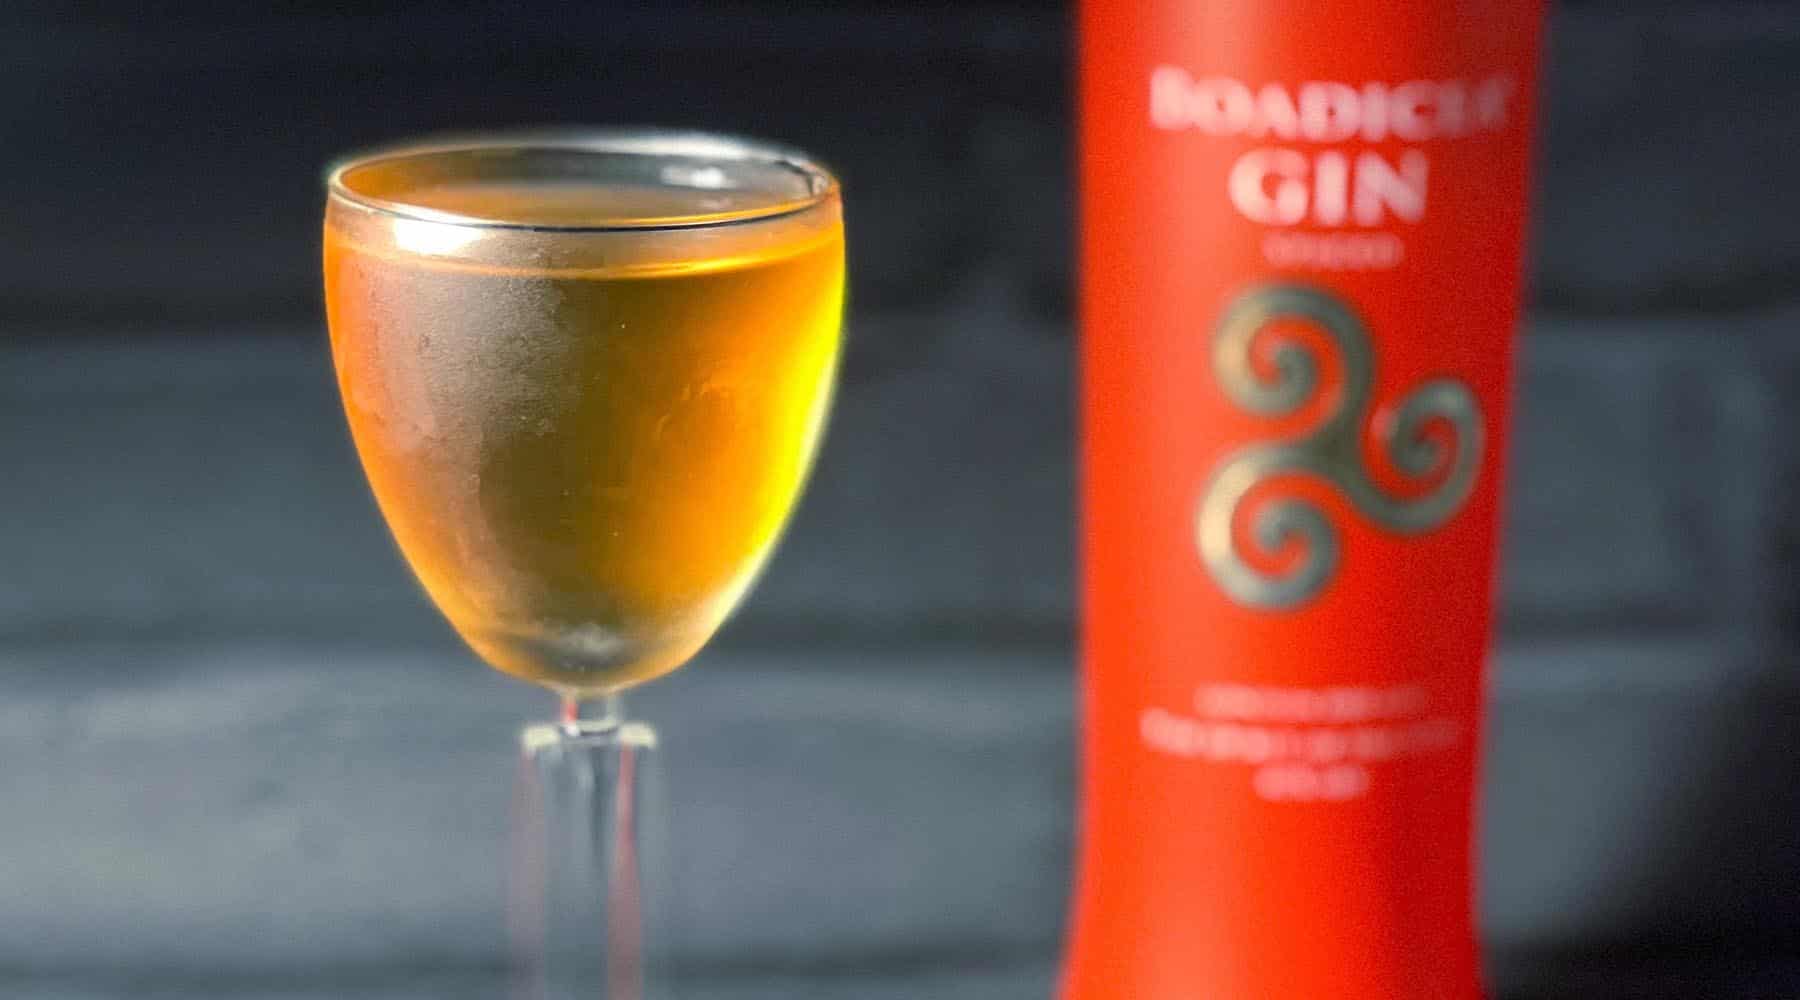 Boadicea® Gin - Spiced - 'Marrying Kind' Cocktail